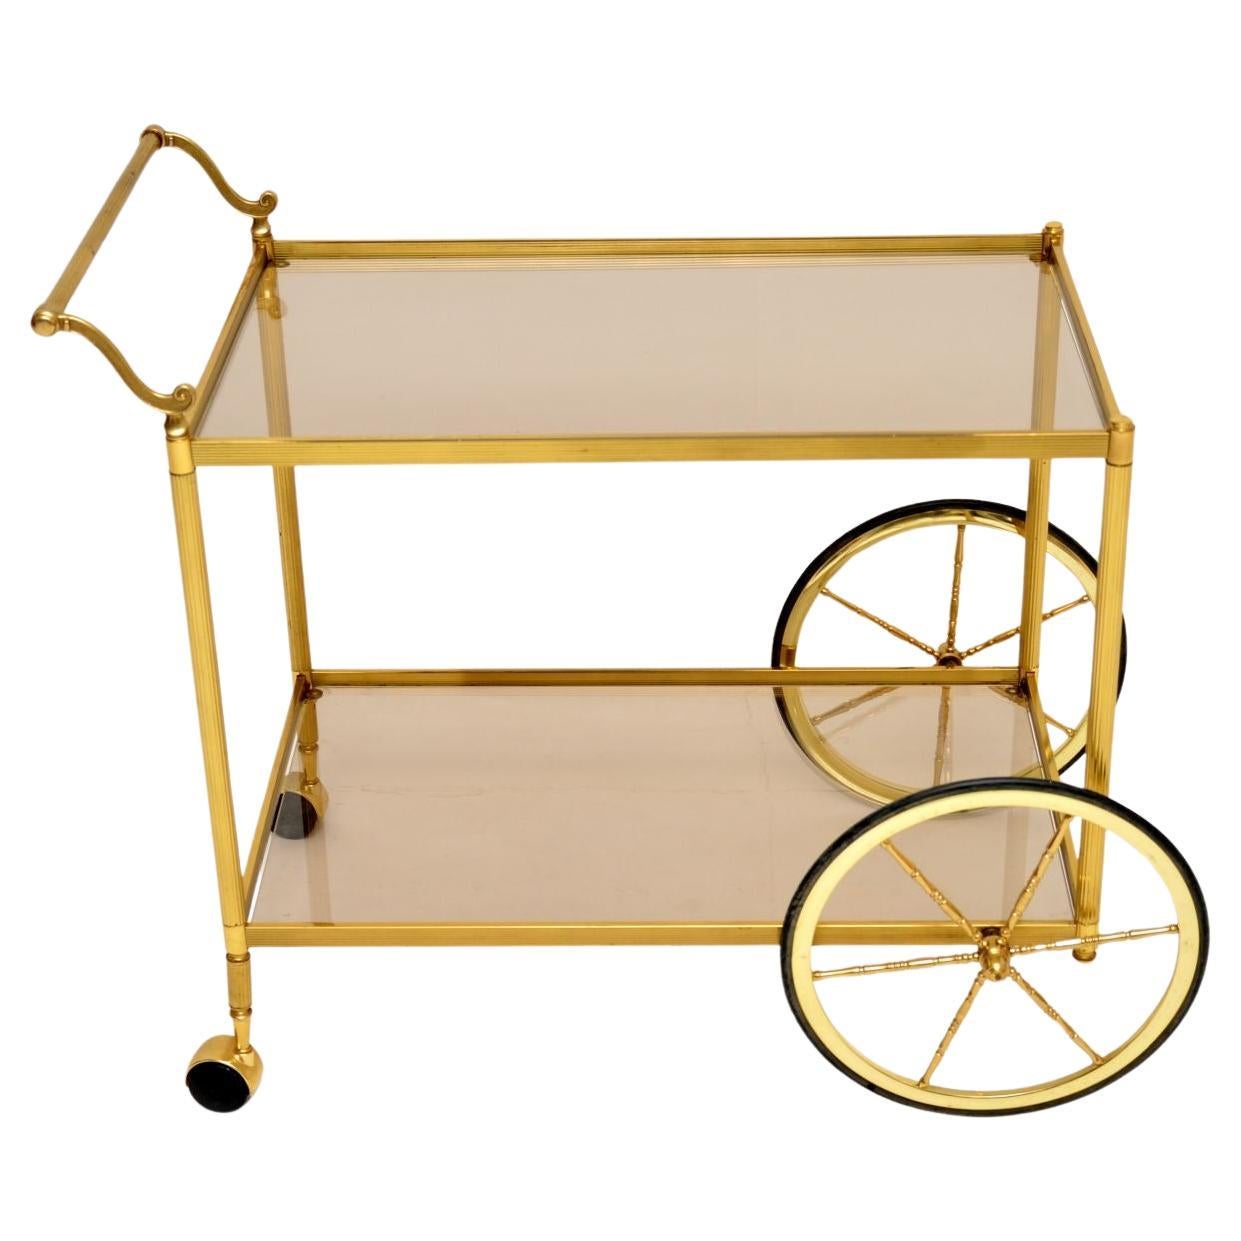 1970’s Vintage French Brass Drinks Trolley / Bar Cart